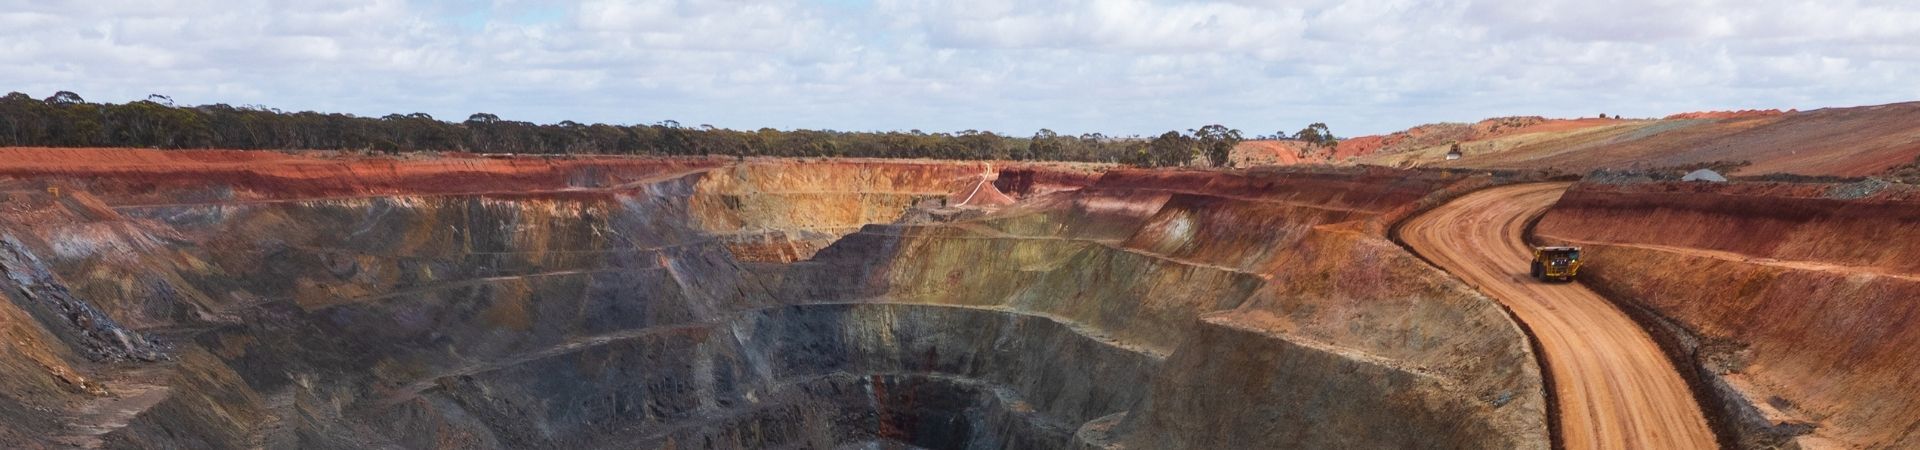 The covid-19 push: Accelerating change in Australian industries | Mining